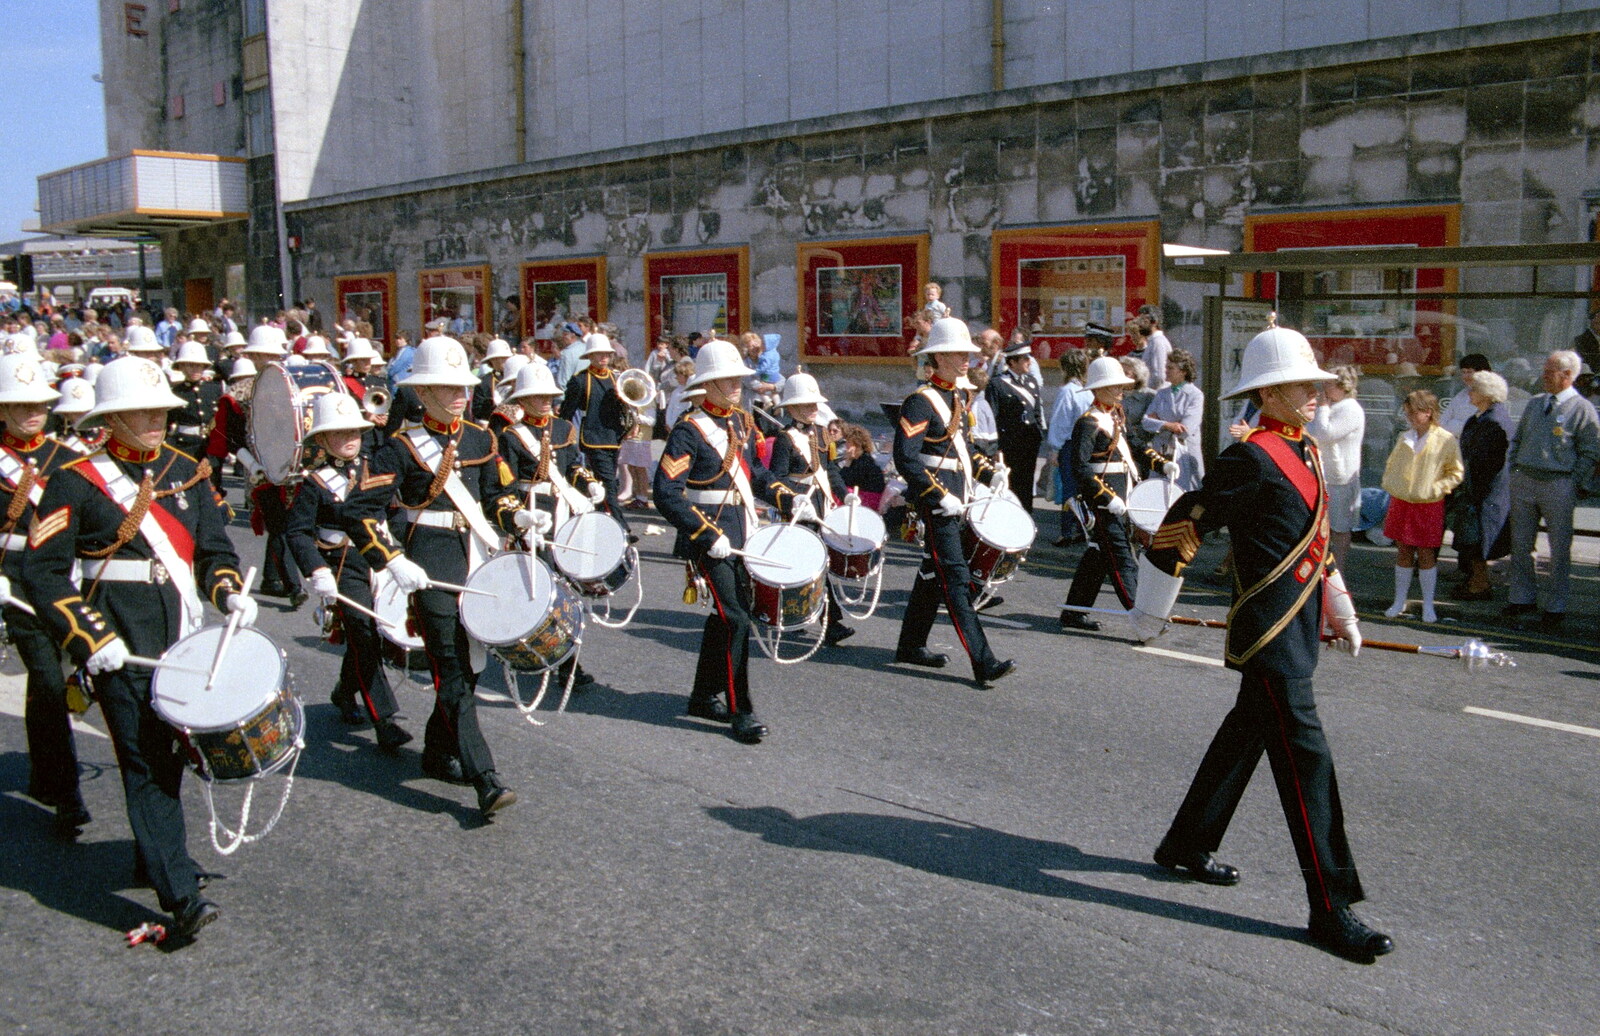 The Royal Marines band from Uni: The Lord Mayor's Procession, Plymouth, Devon - 21st May 1986